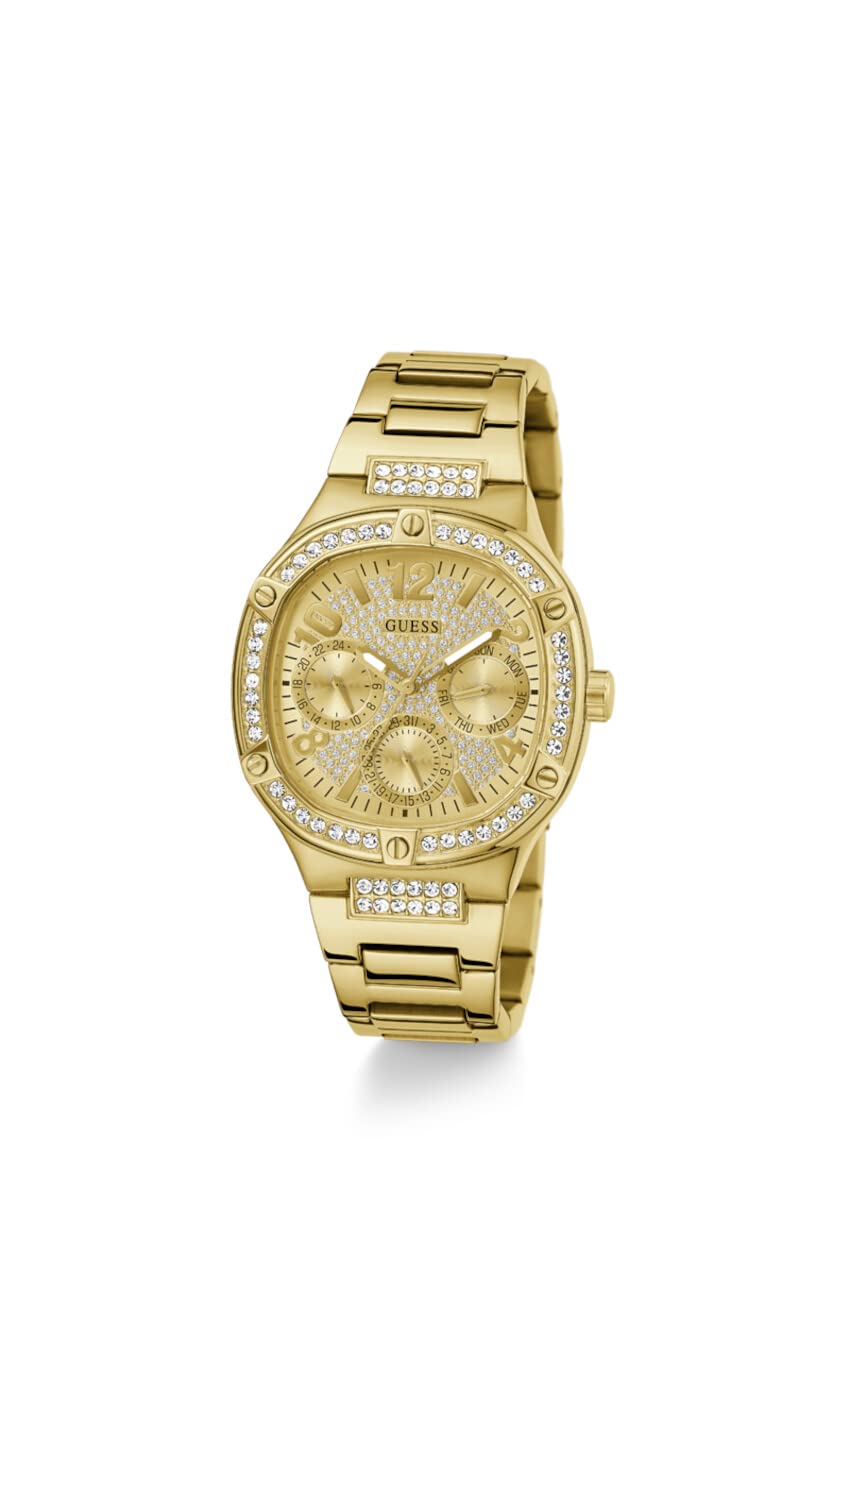 GUESS Ladies 40mm Watch - Gold Tone Strap Gold Dial Gold Tone Case